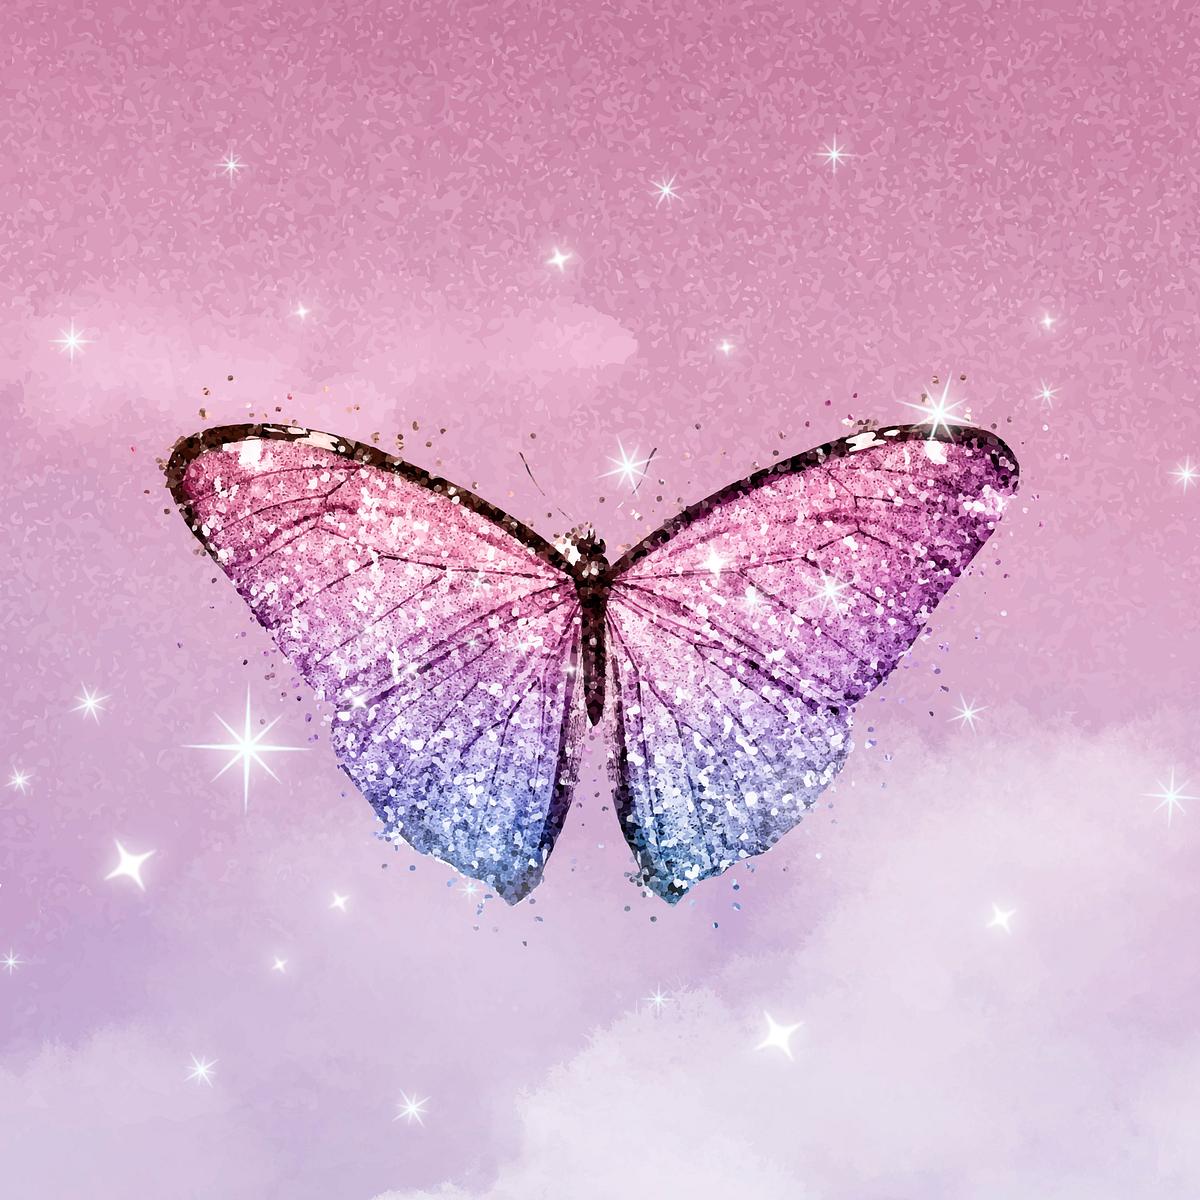 Butterfly Background Images | Free iPhone & Zoom HD Wallpapers ...